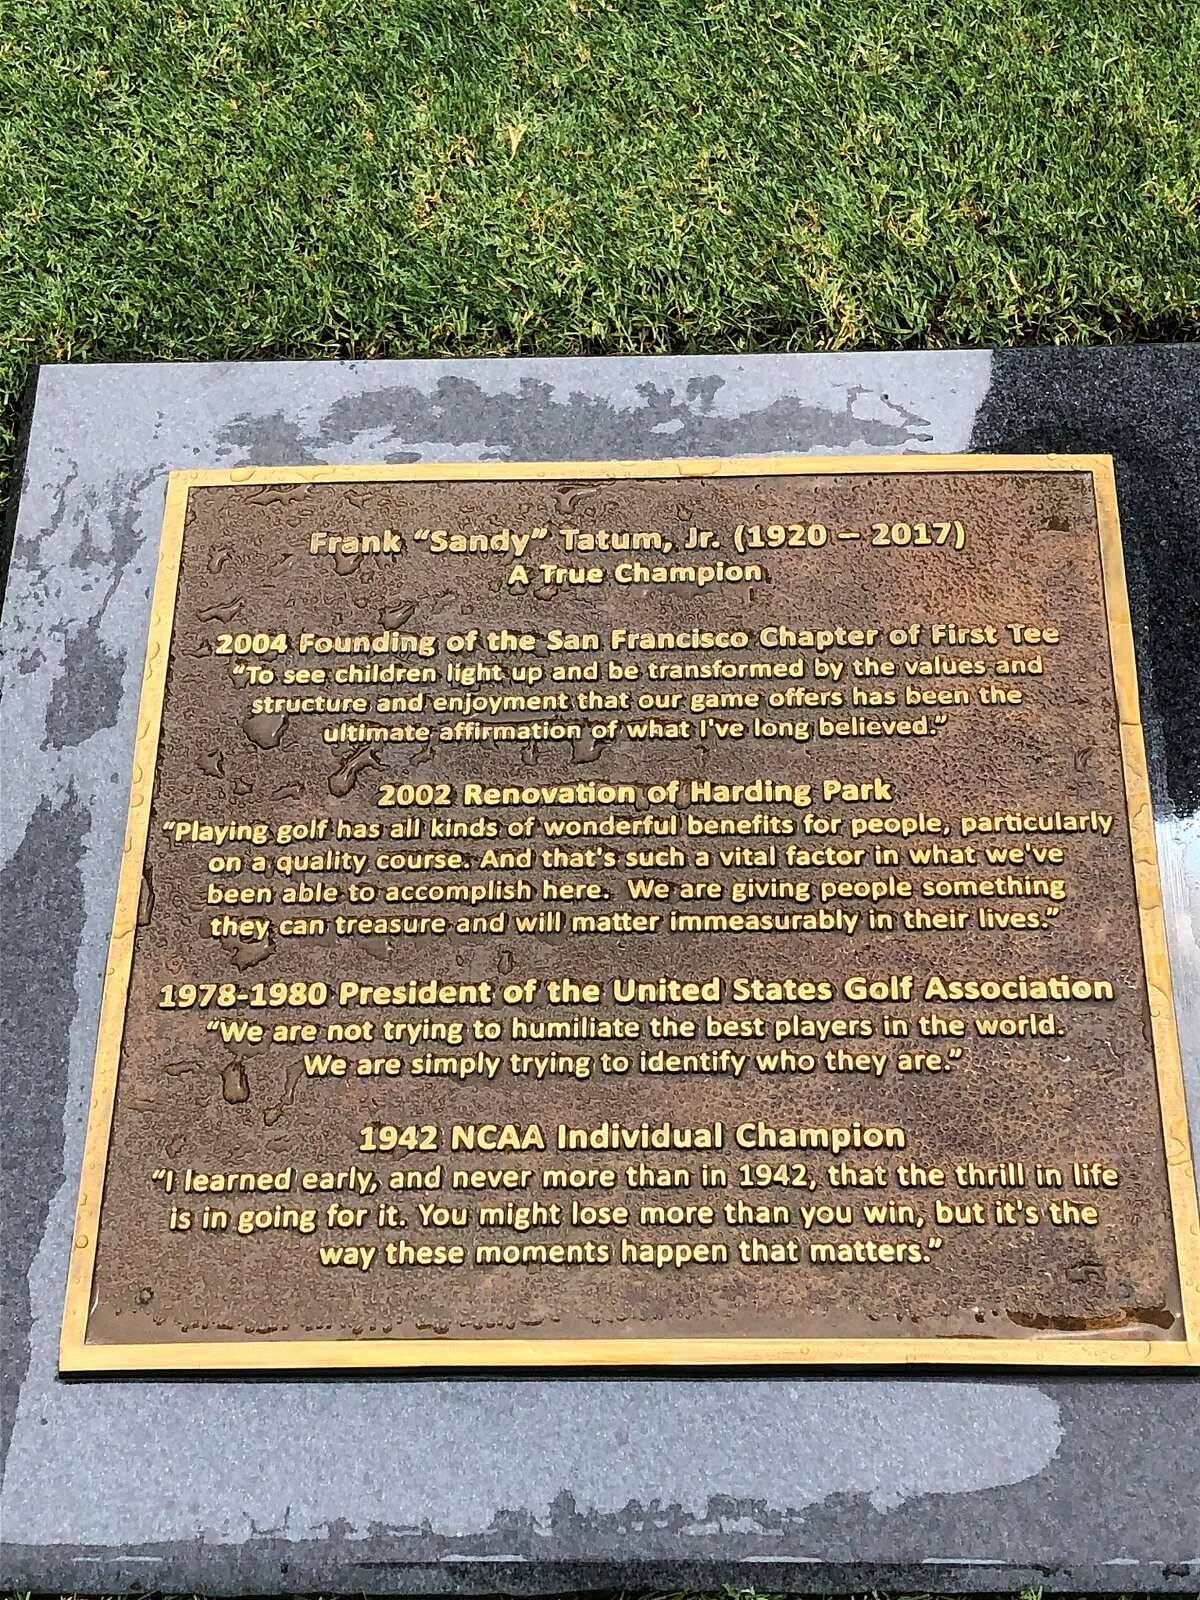 This is the plaque alongside the Sandy Tatum statue at Harding Park.